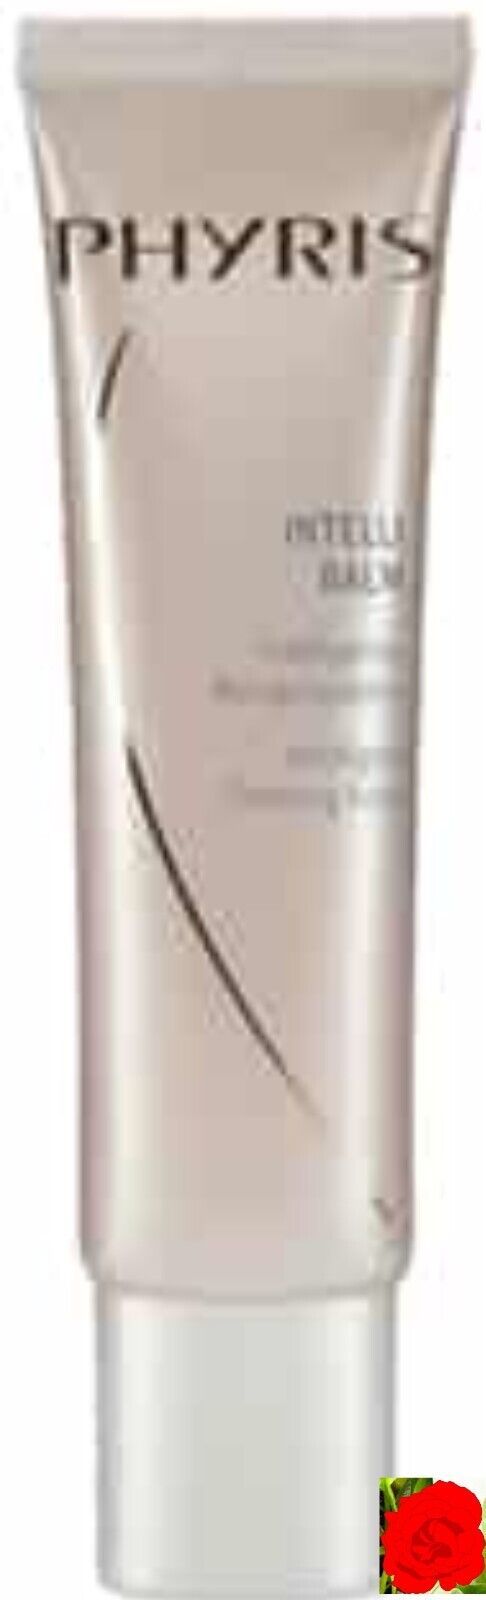 Primary image for Phyris Intelli Balm 75ml. a clever 2 in 1 cleansing product